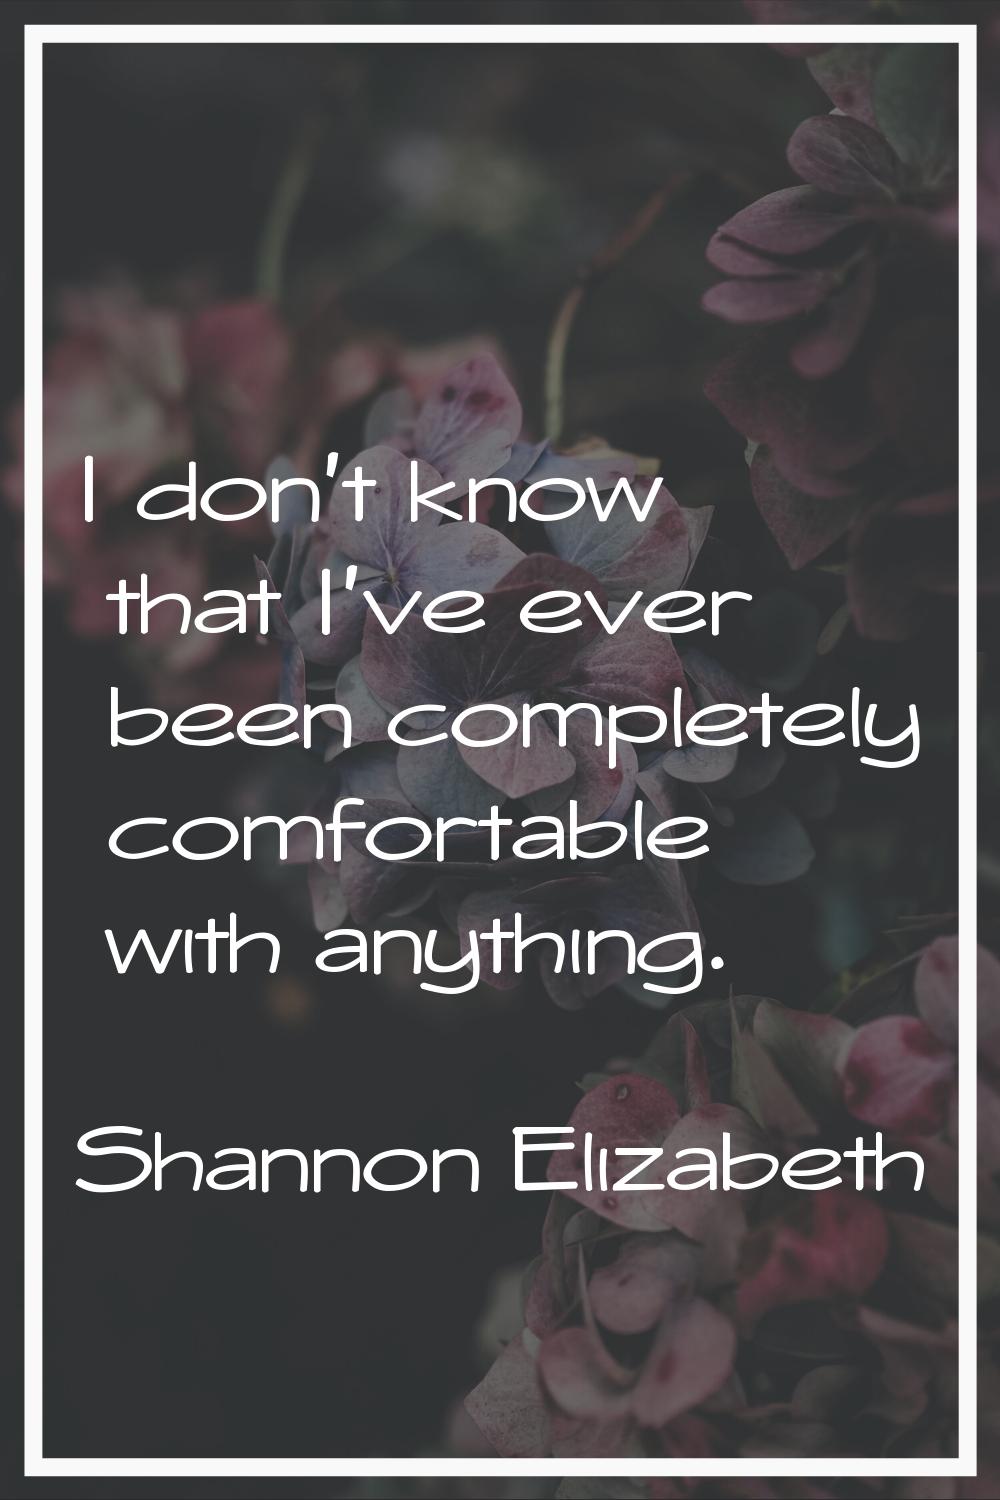 I don't know that I've ever been completely comfortable with anything.